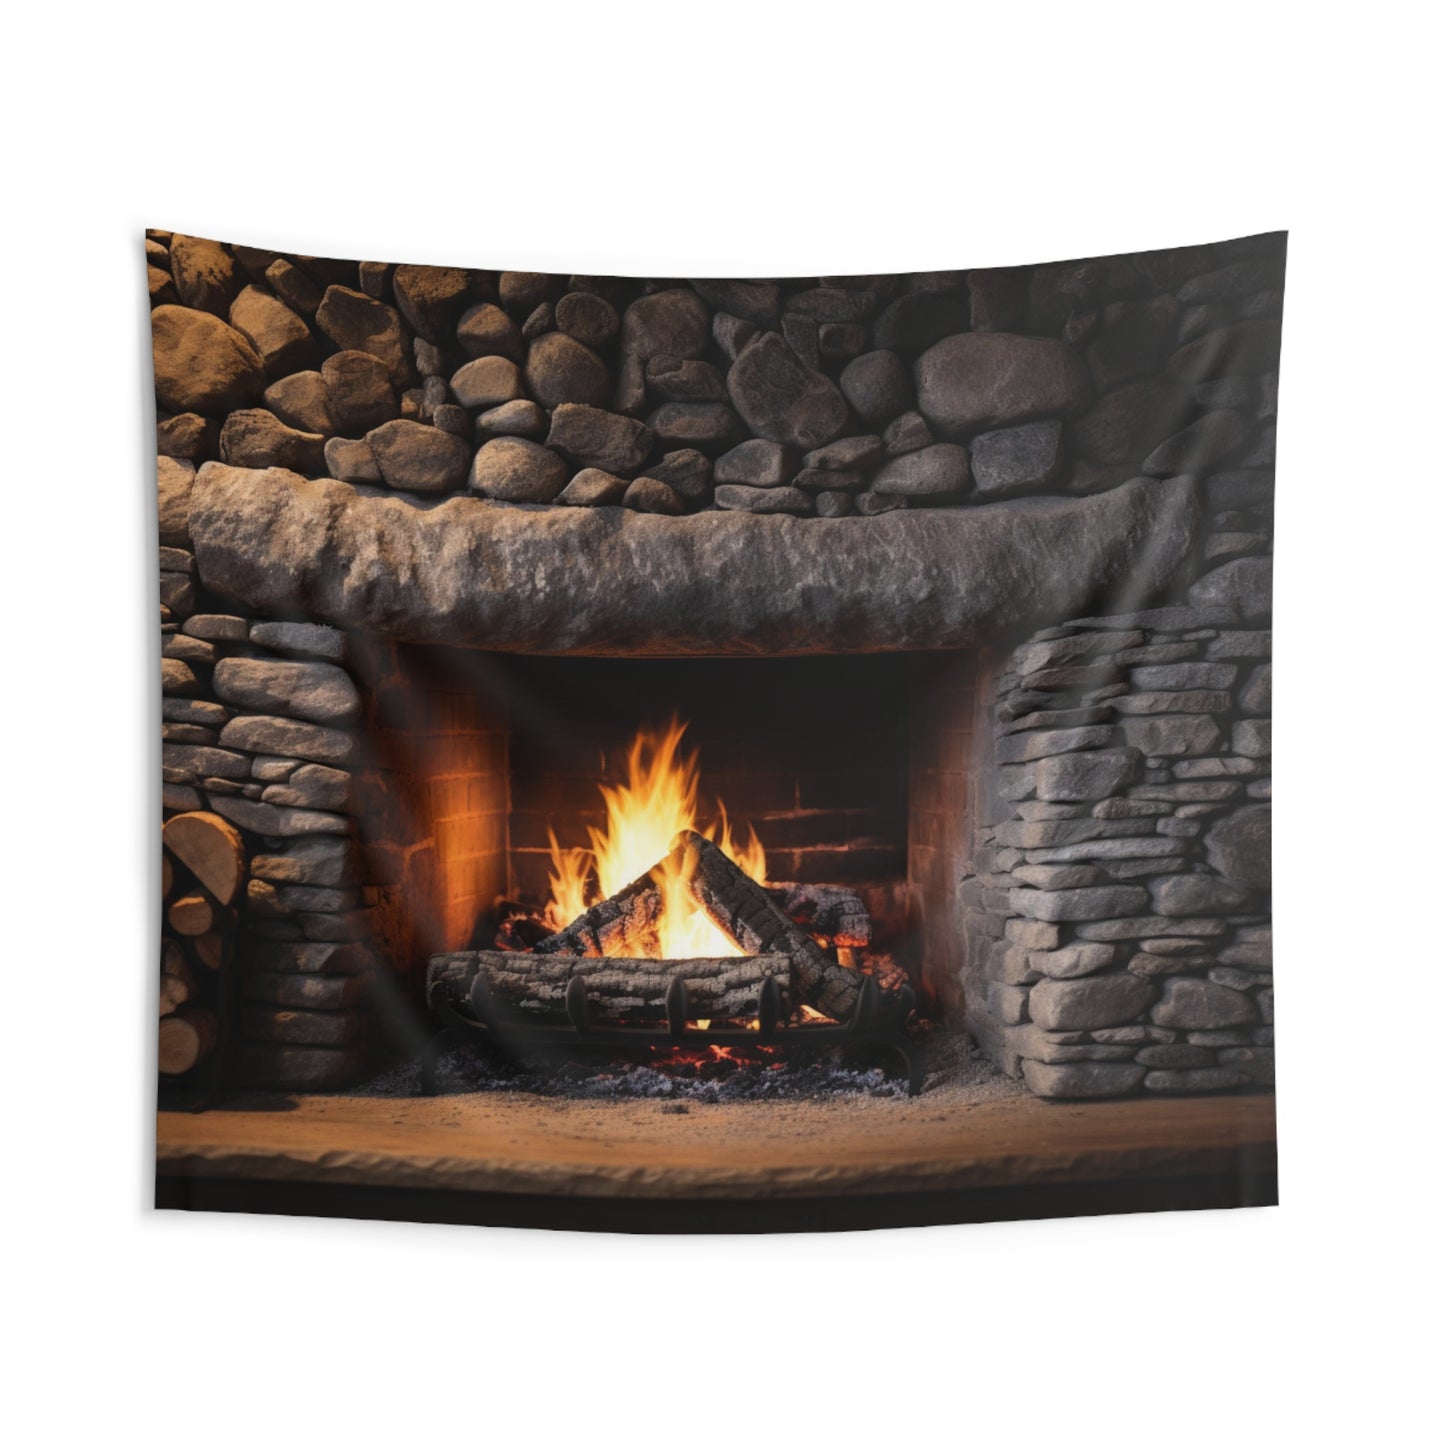 Fireplace Tapestry, Stone Fire Vintage Wall Art Hanging Cool Unique Landscape Aesthetic Large Small Decor Bedroom College Dorm Room Starcove Fashion